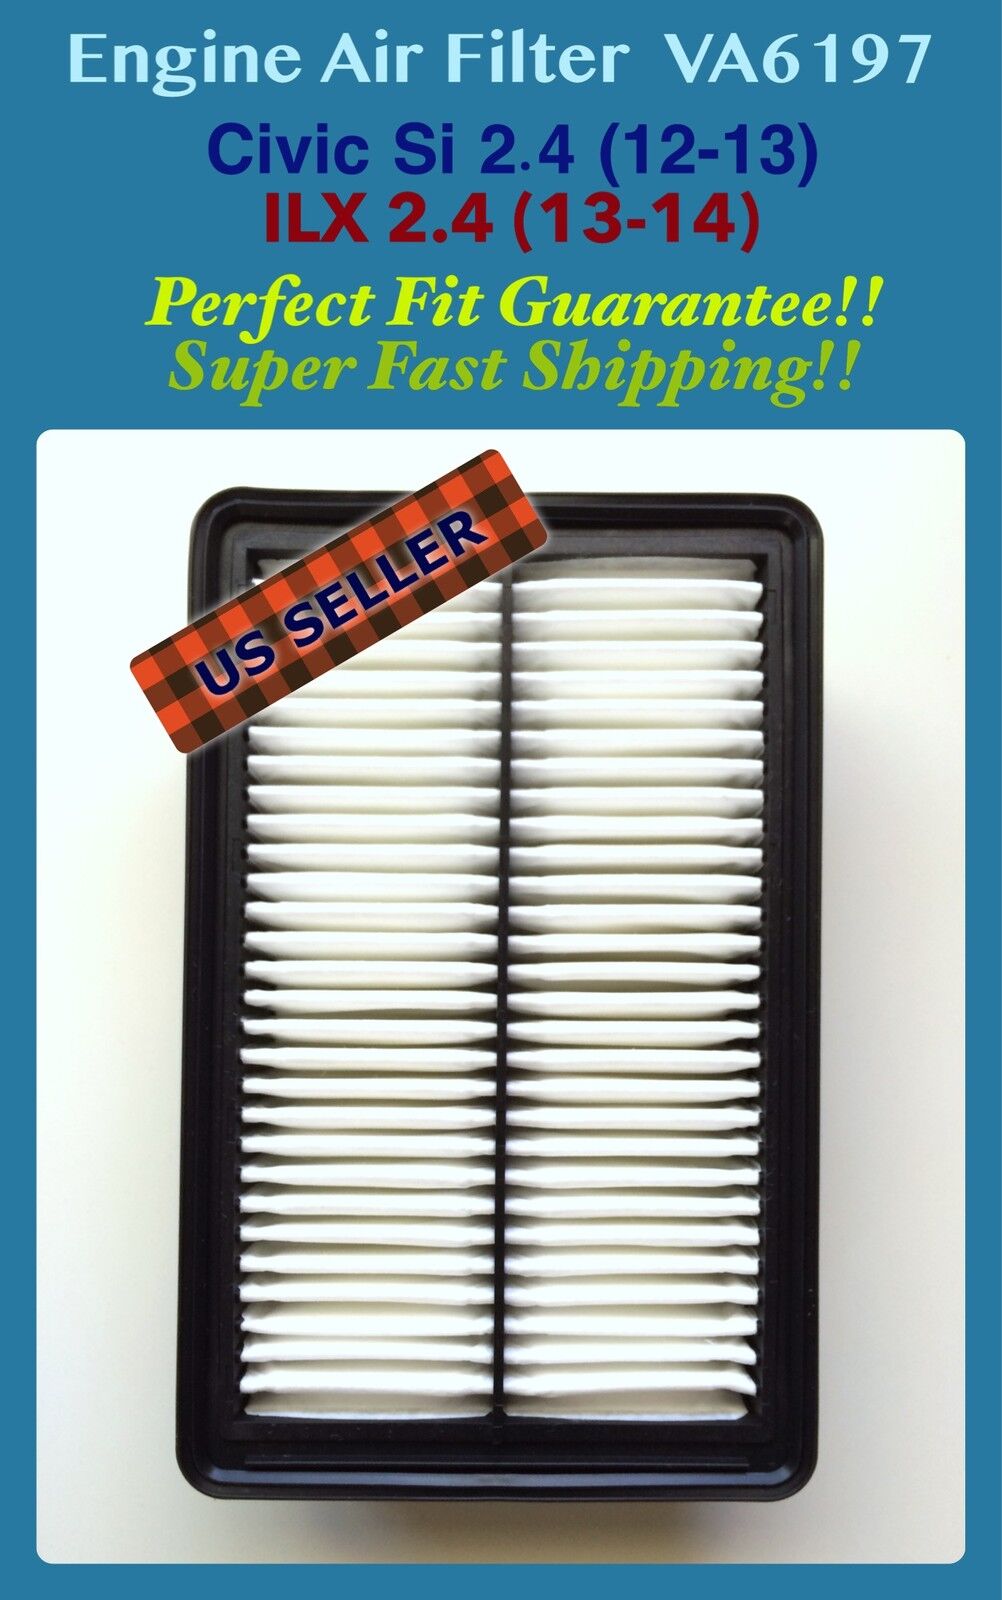 Engine Air Filter For Civic Si 2.4 / ILX 2.4  12-15 VA6197 Fast Ship US Seller